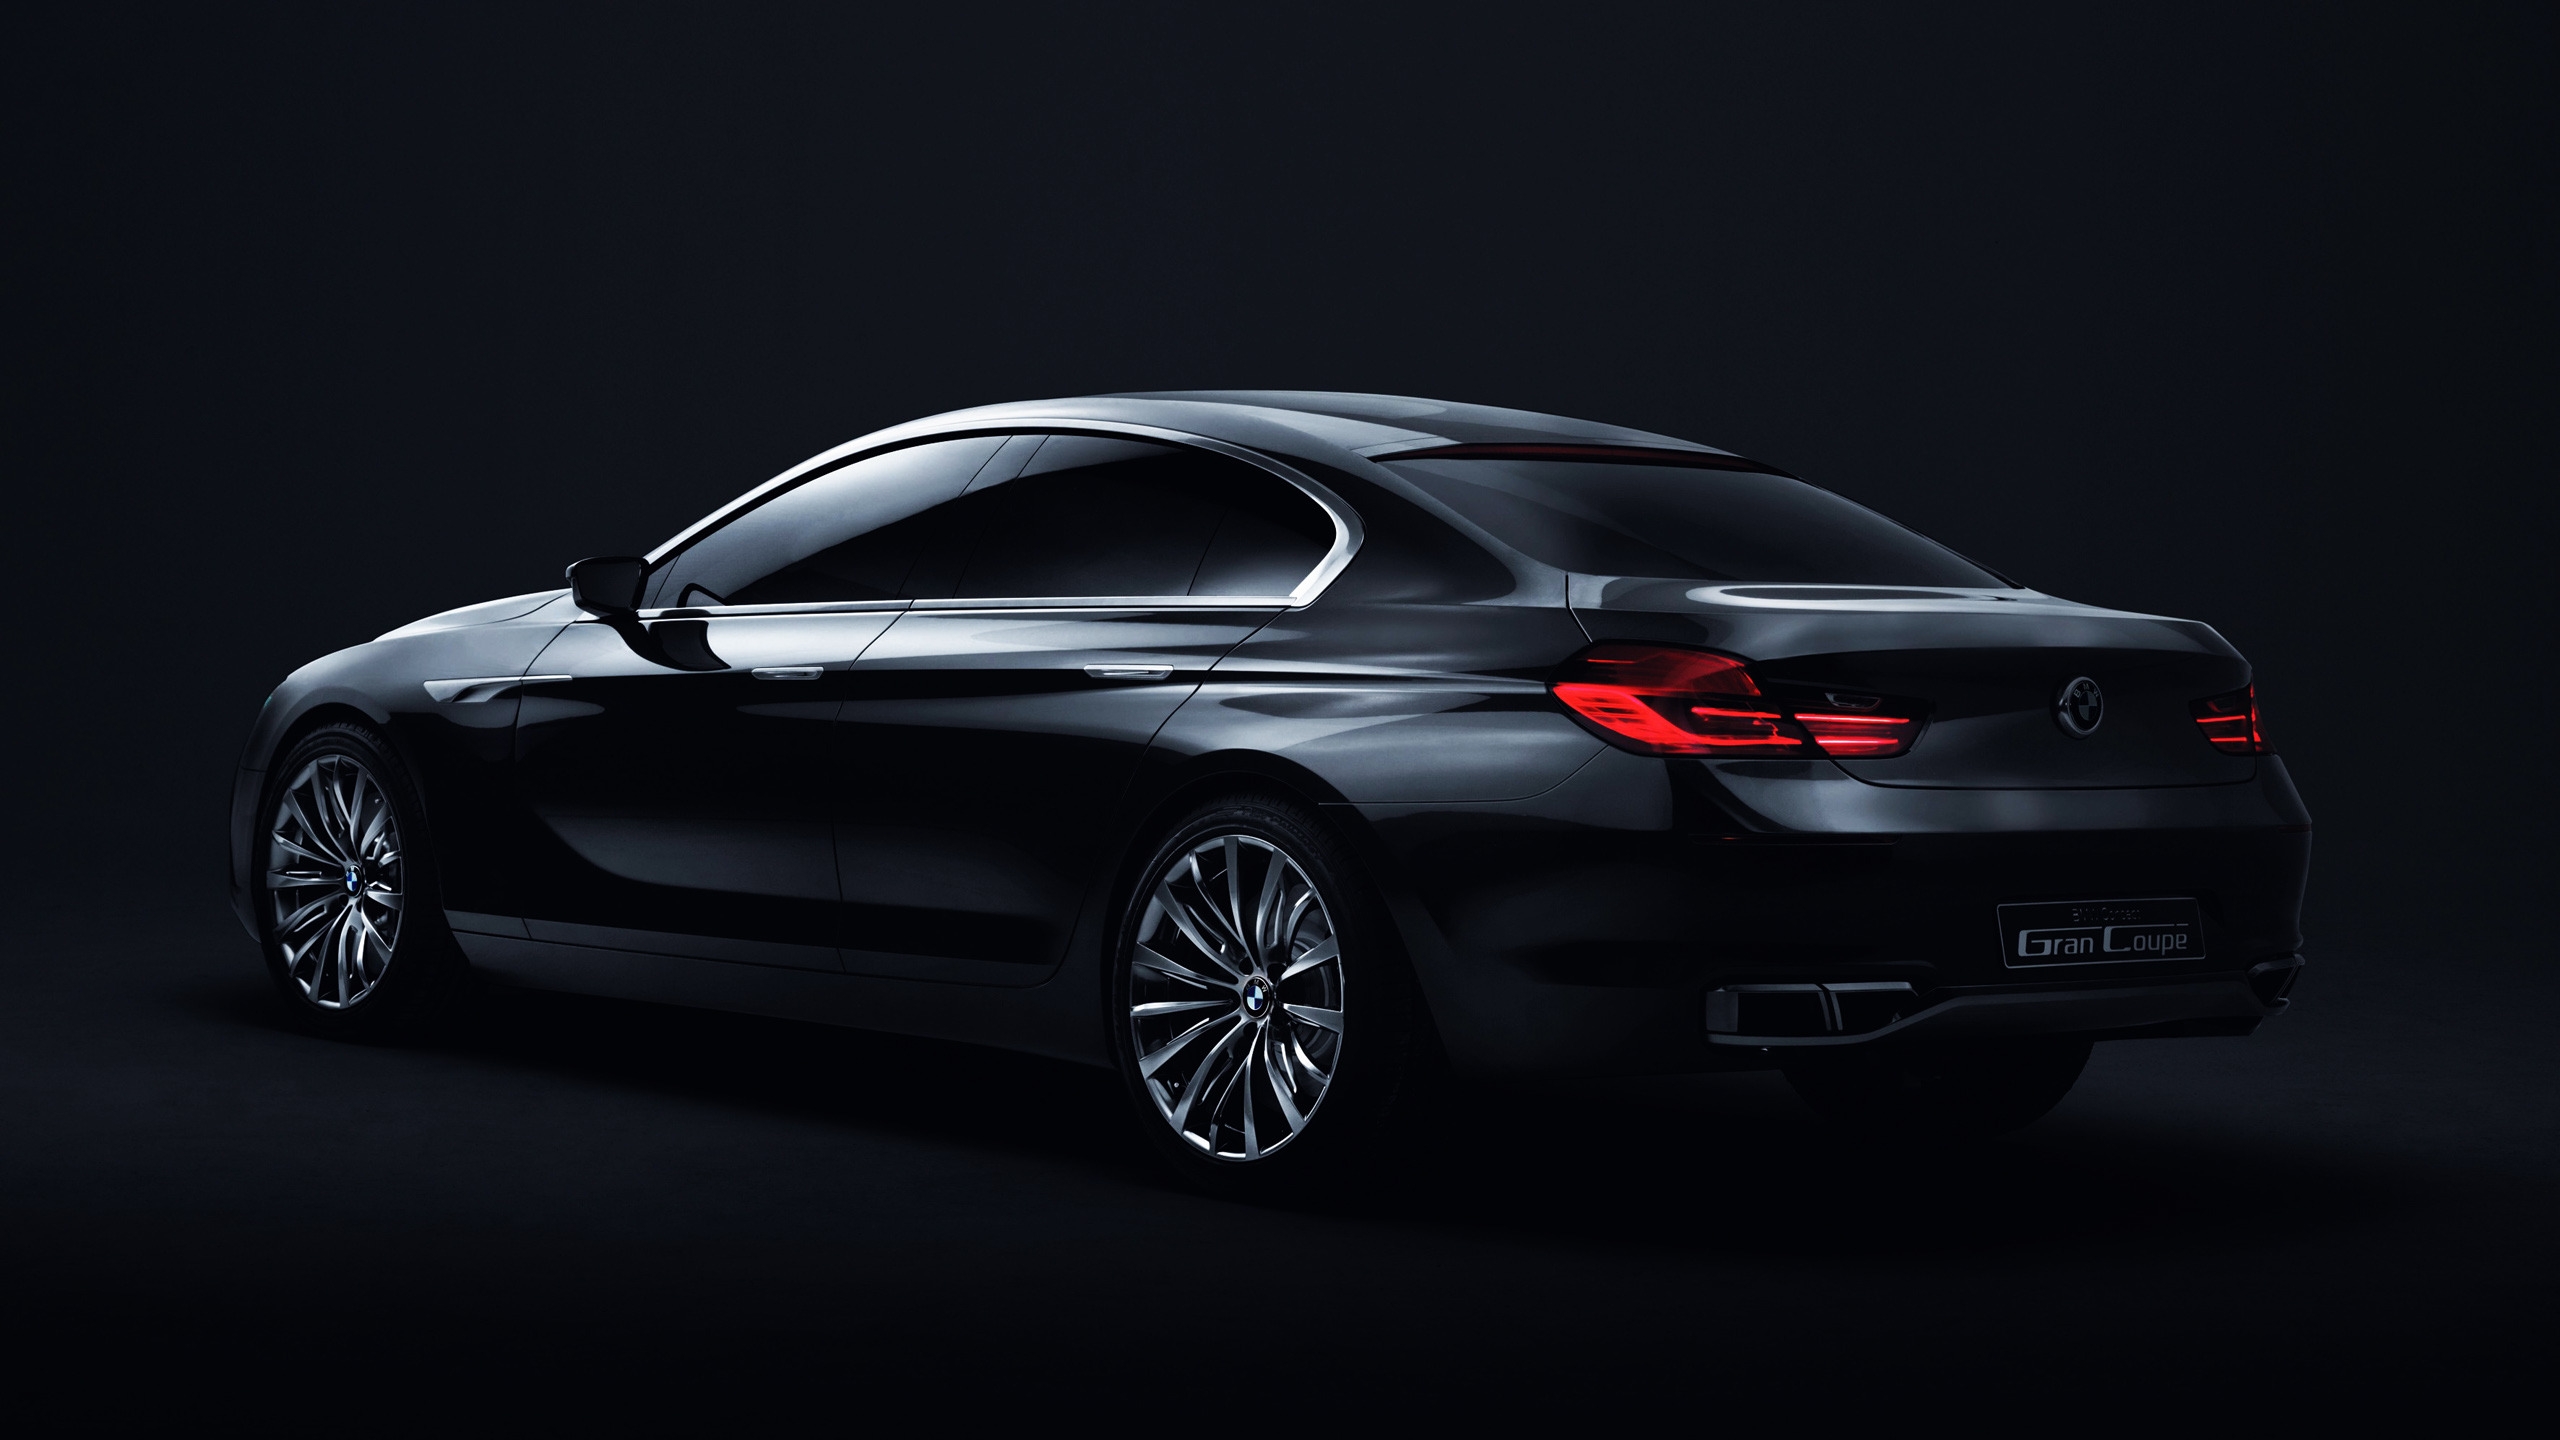 BMW Gran Coupe Rear for 2560x1440 HDTV resolution